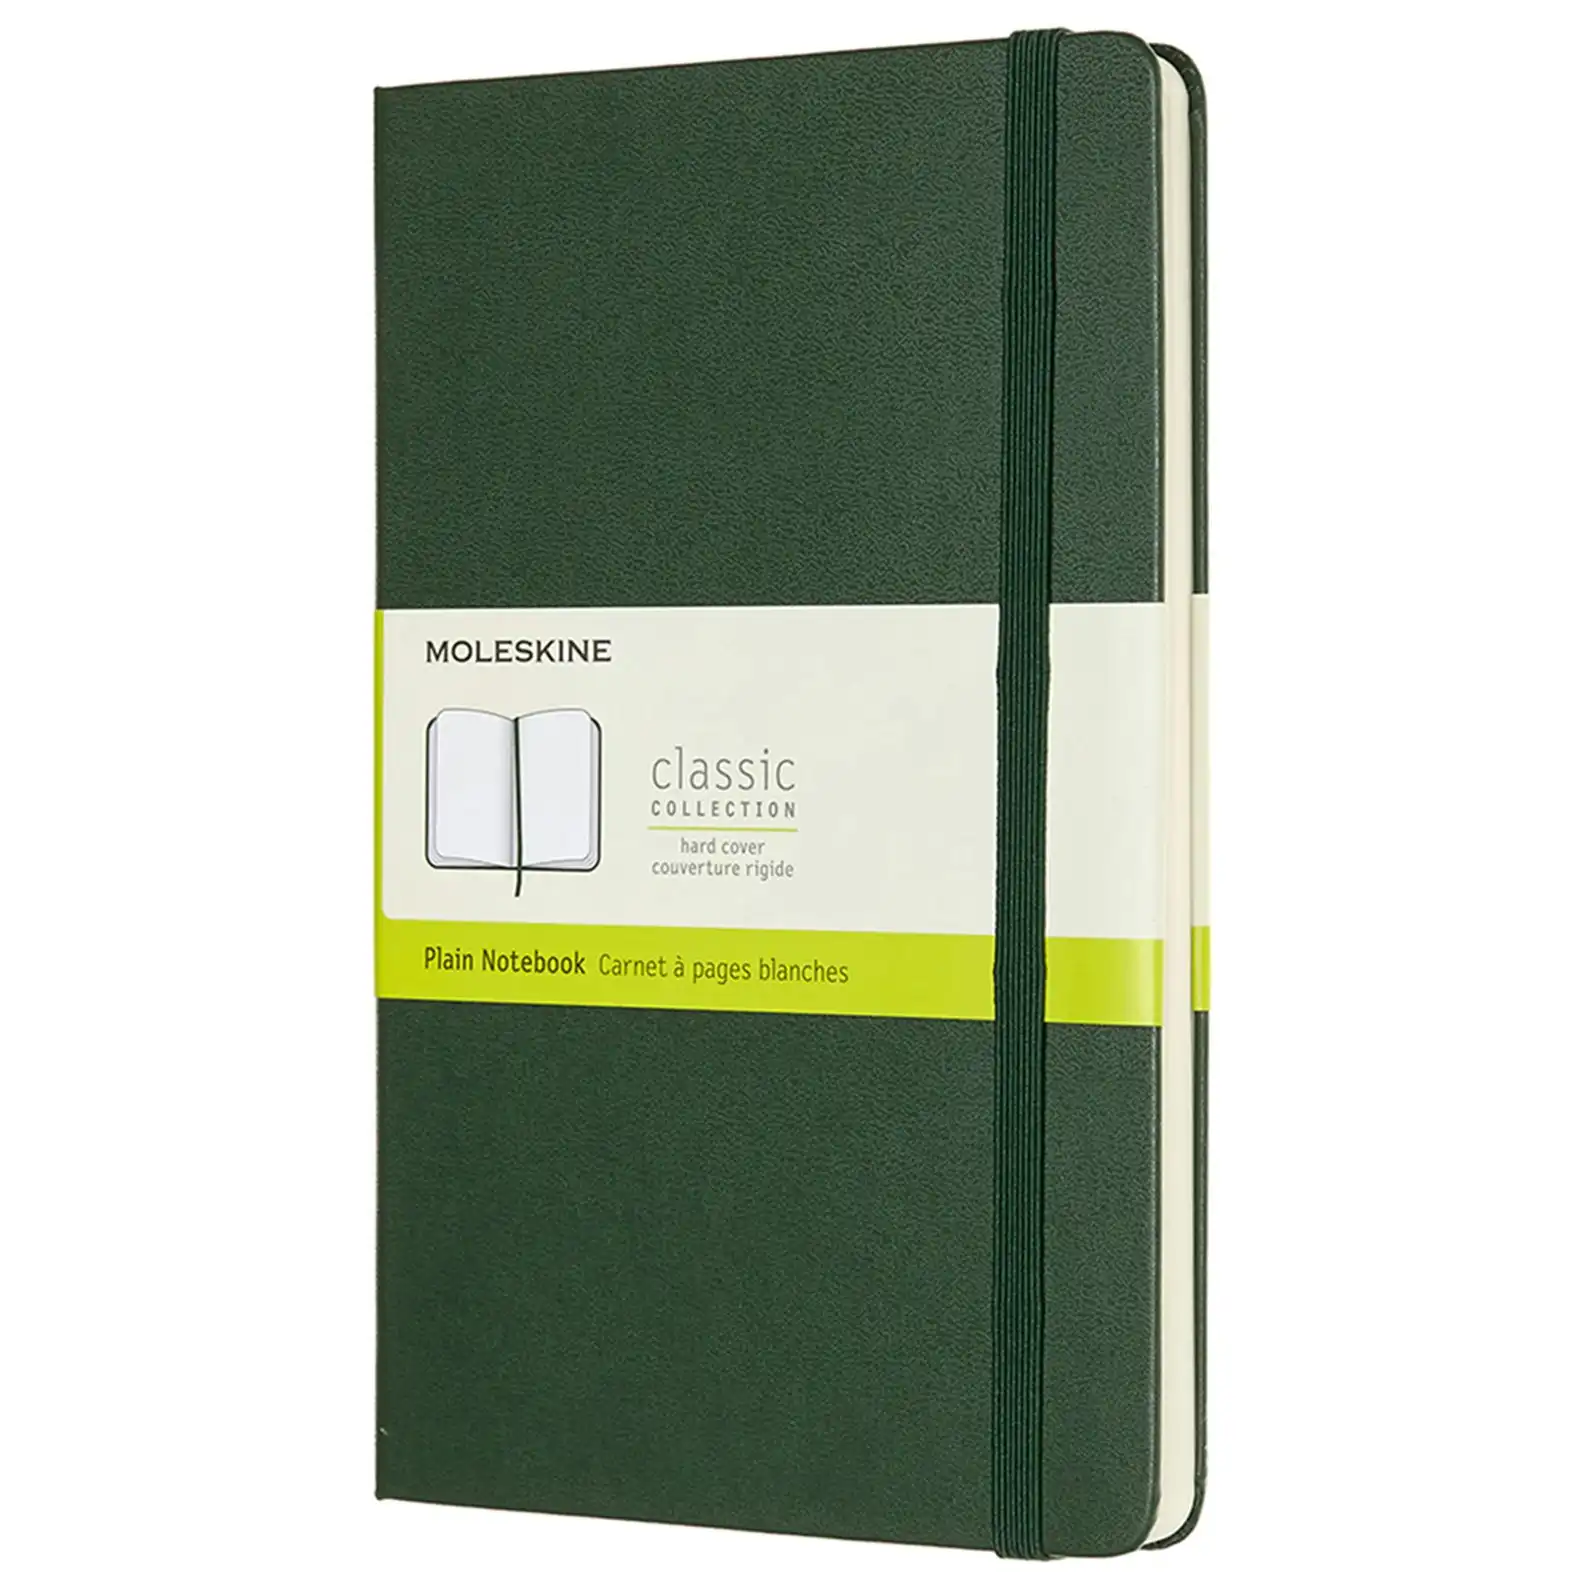 Moleskine Classic Hard Cover Notebook Plain Student Journal Pad L Myrtle Green